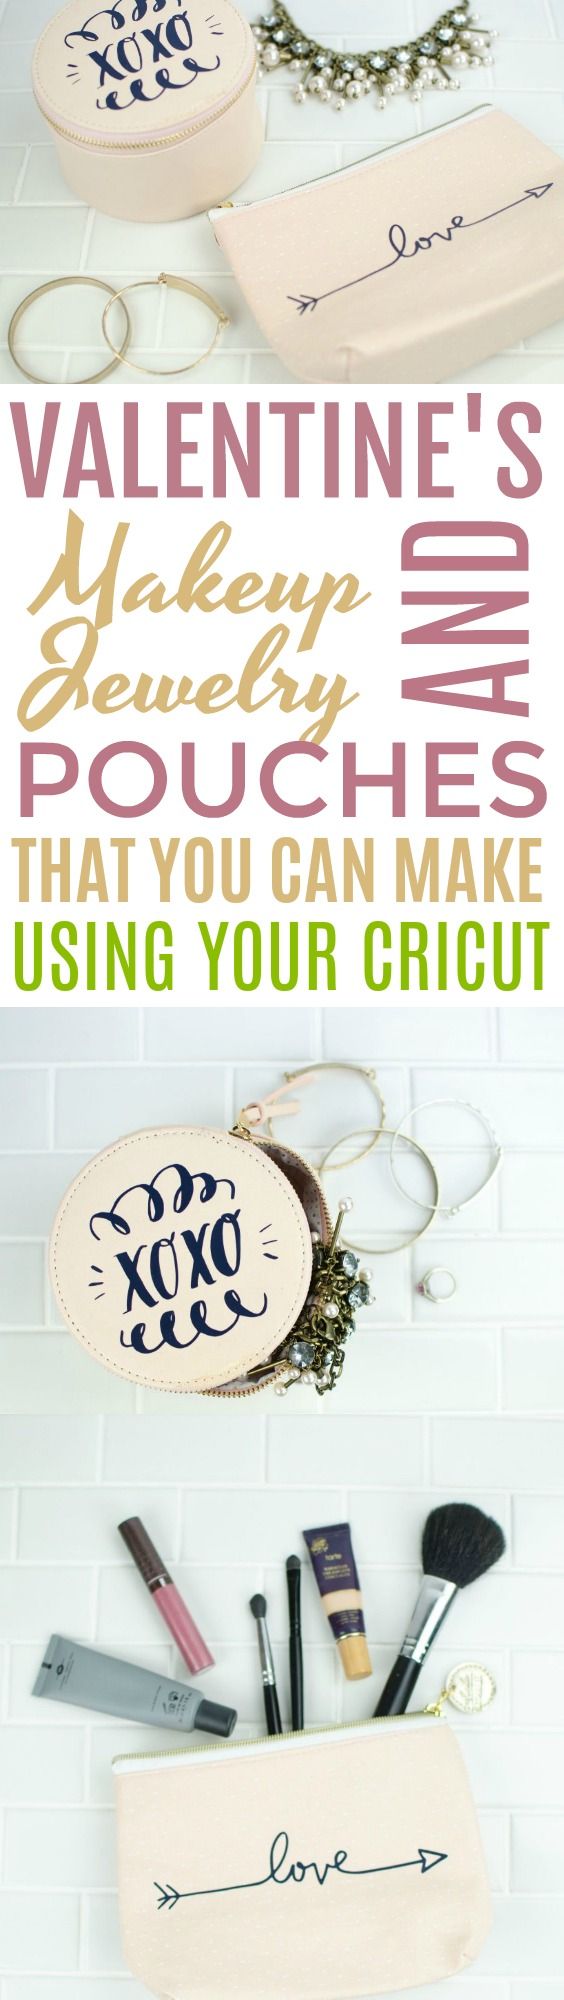 Today I want to show you a great DIY Cricut Project – Makeup and Jewelry Pouch...